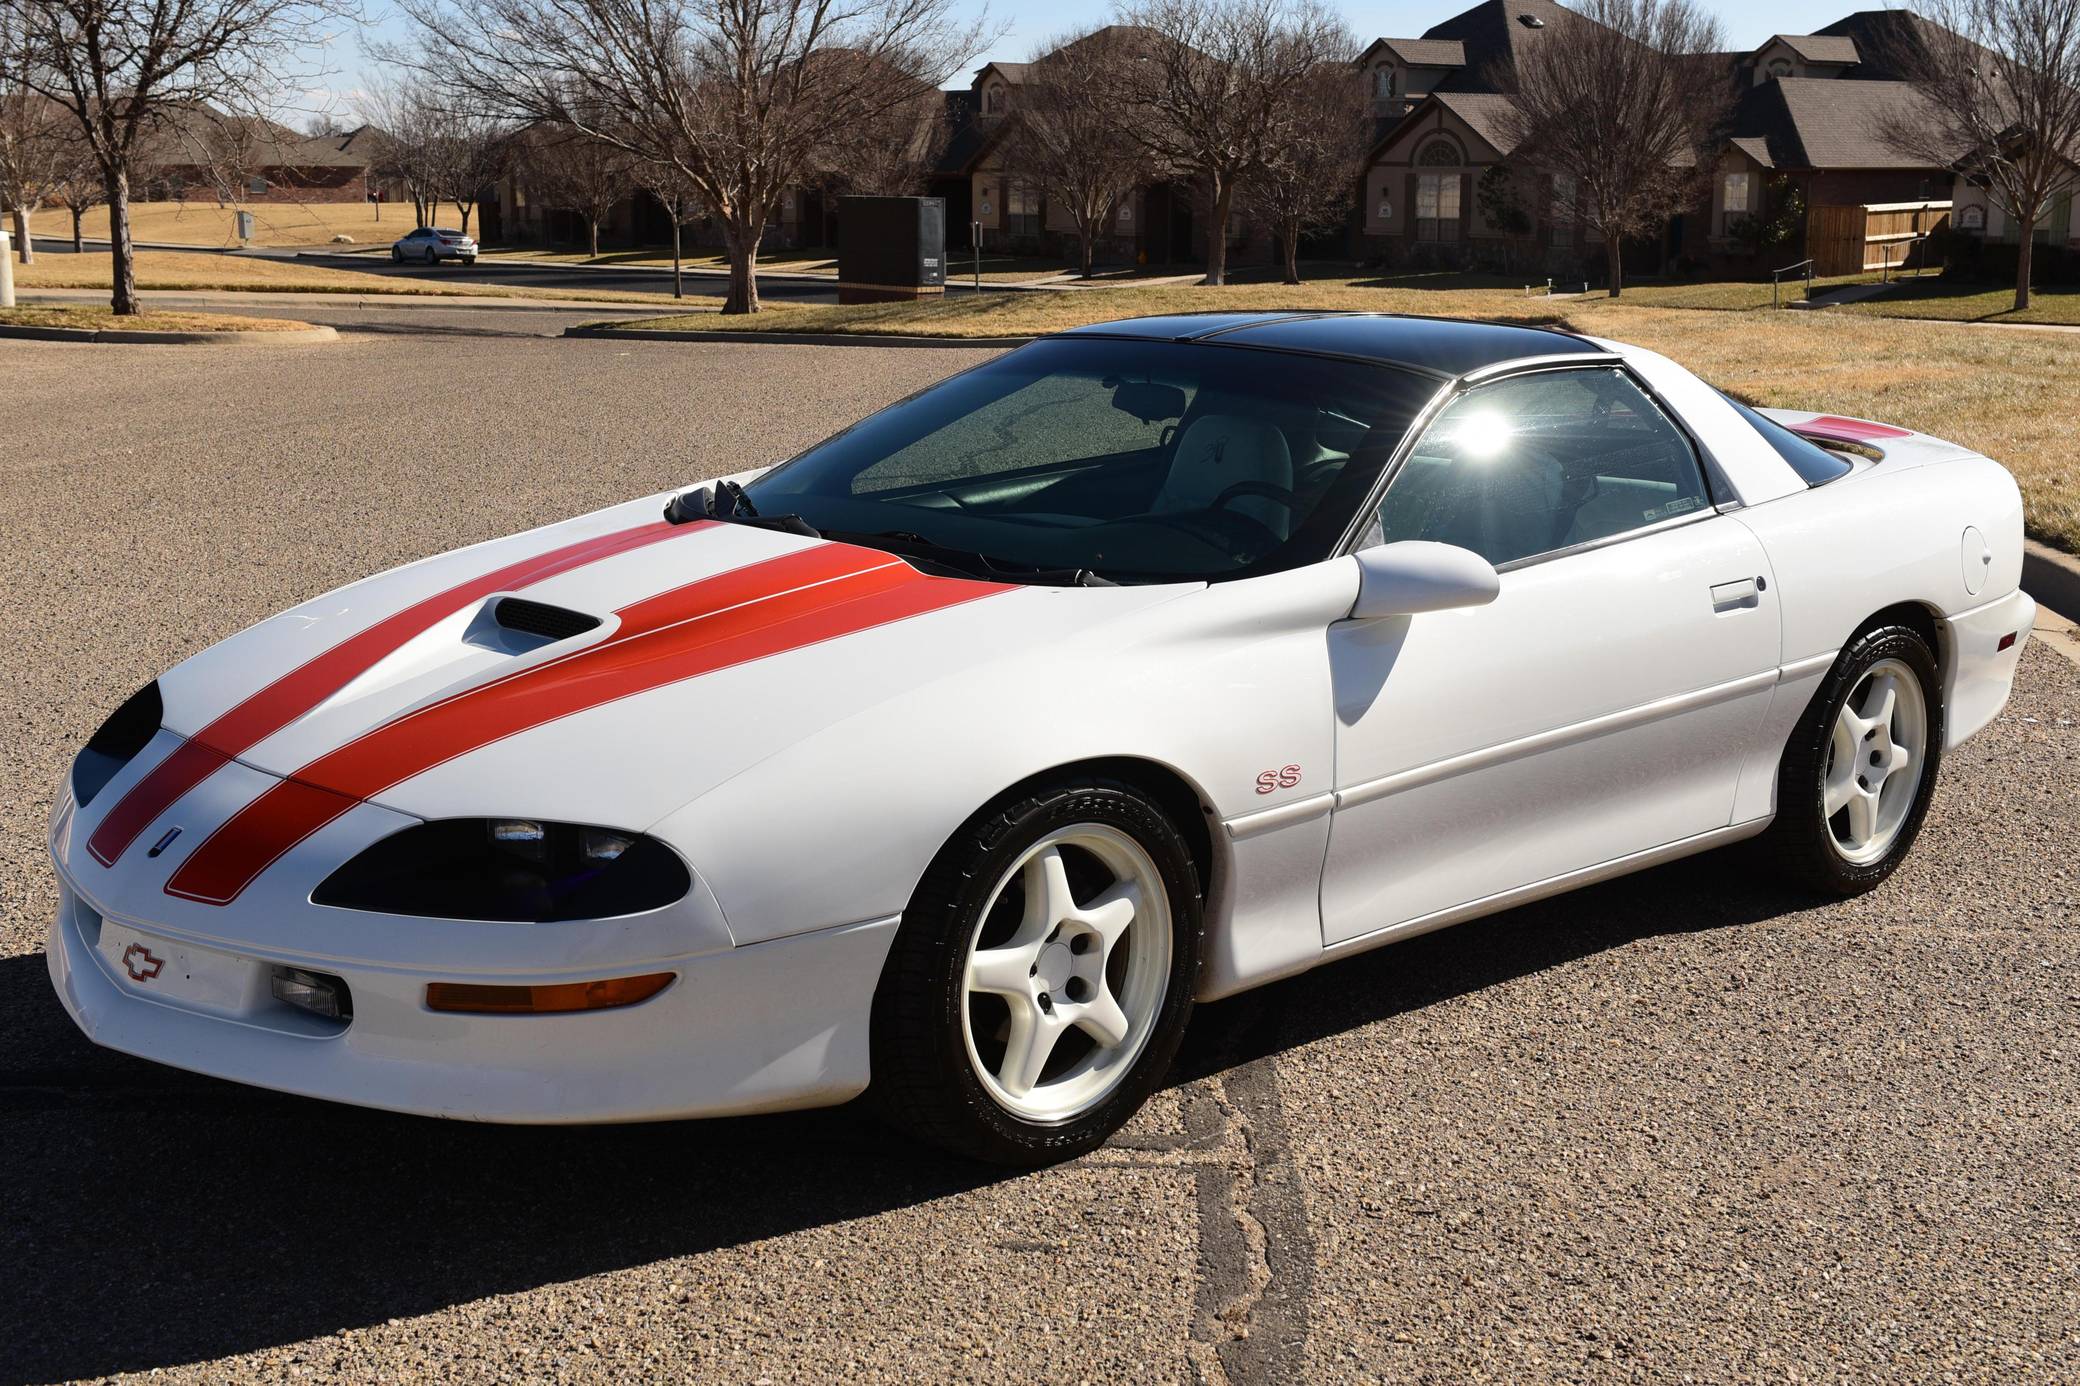 1997 Chevrolet Camaro Z28 SS 30th Anniversary Edition for Sale - Cars & Bids